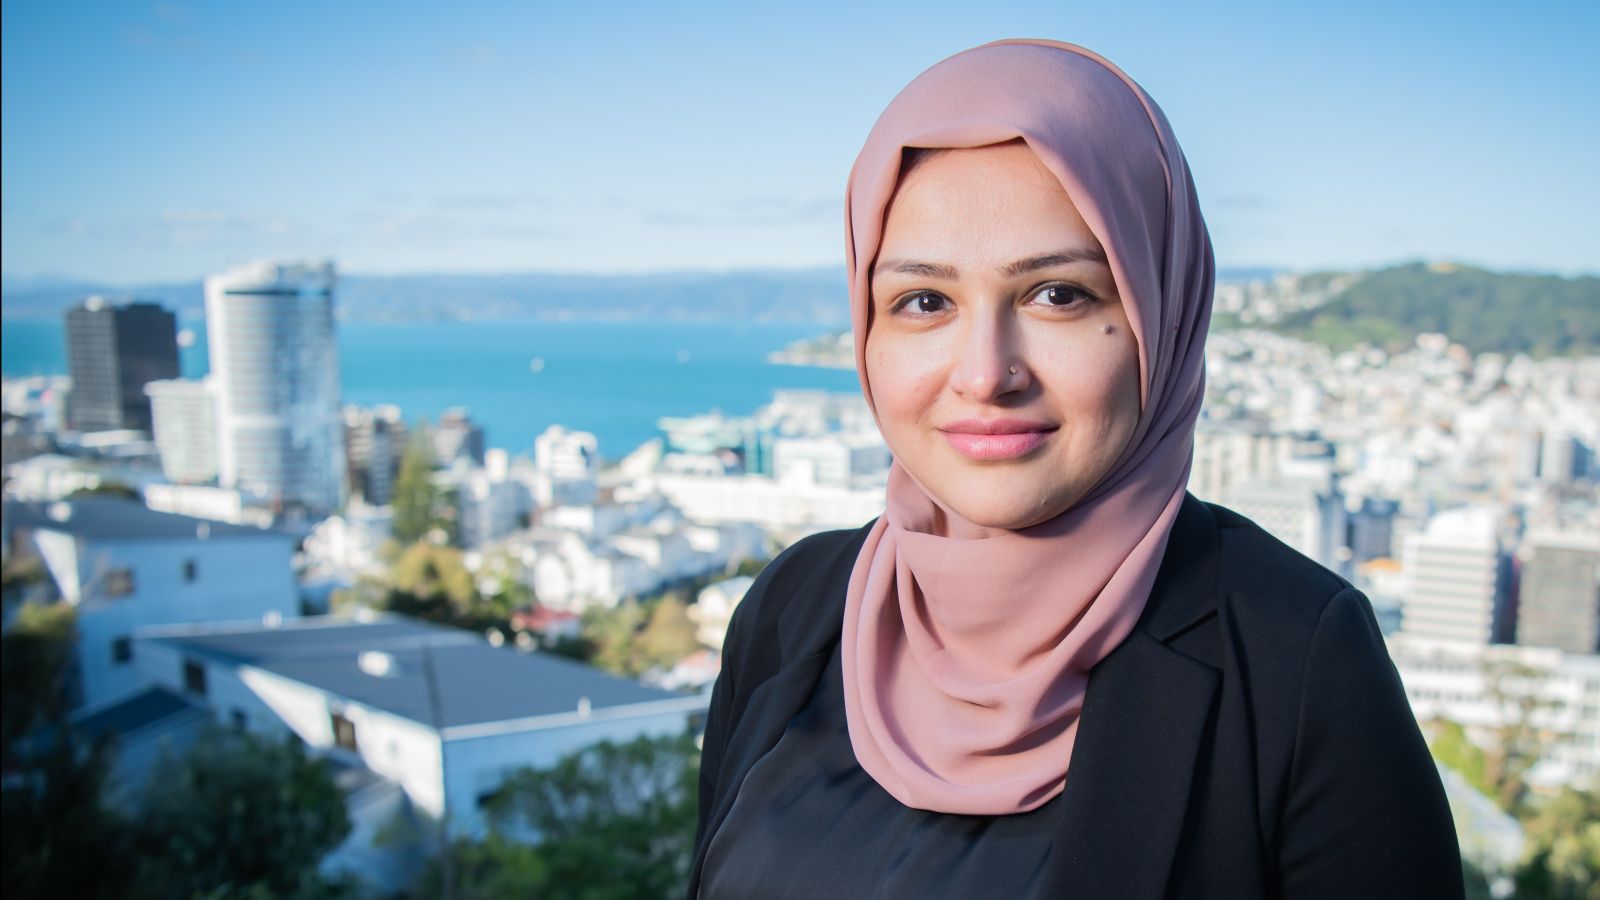 PhD student Qurrat UI Ain with Wellington in the background.